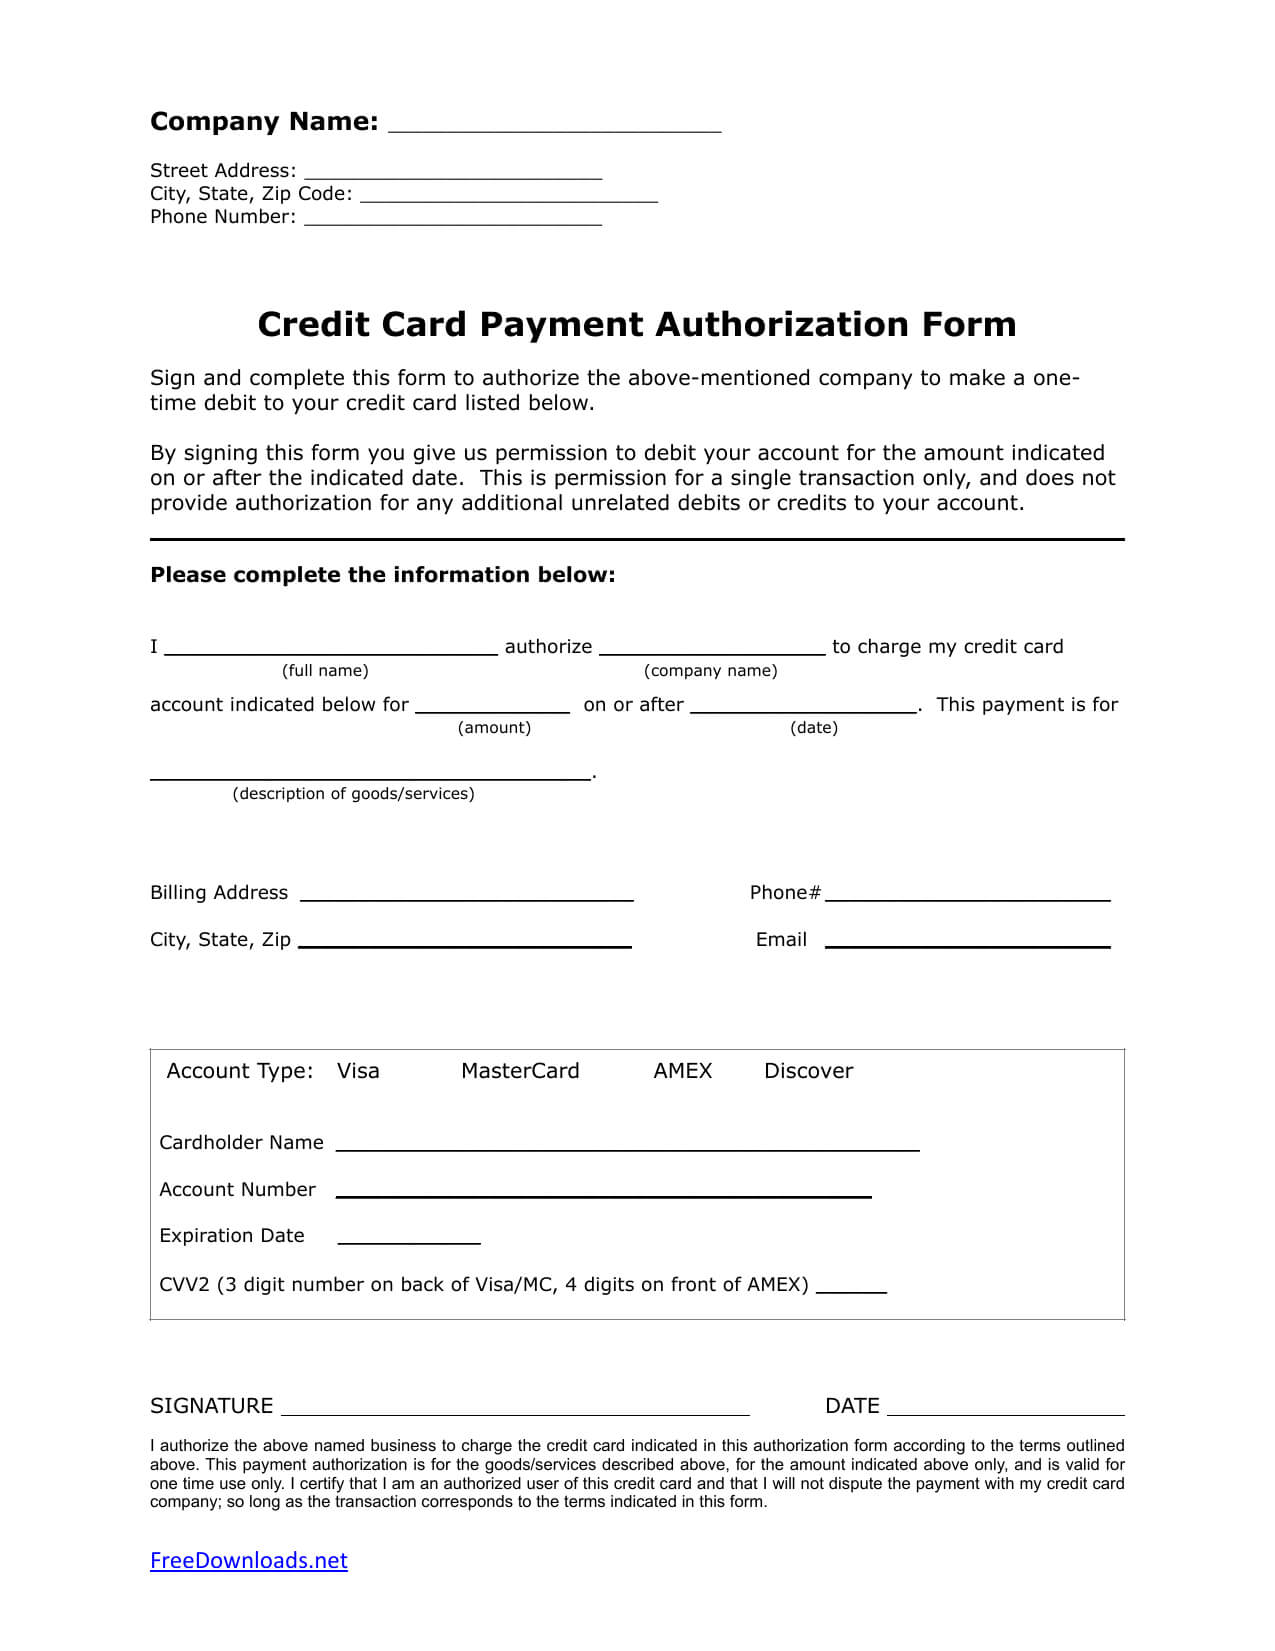 Download One (1) Time Credit Card Authorization Payment Form In Credit Card Authorization Form Template Word